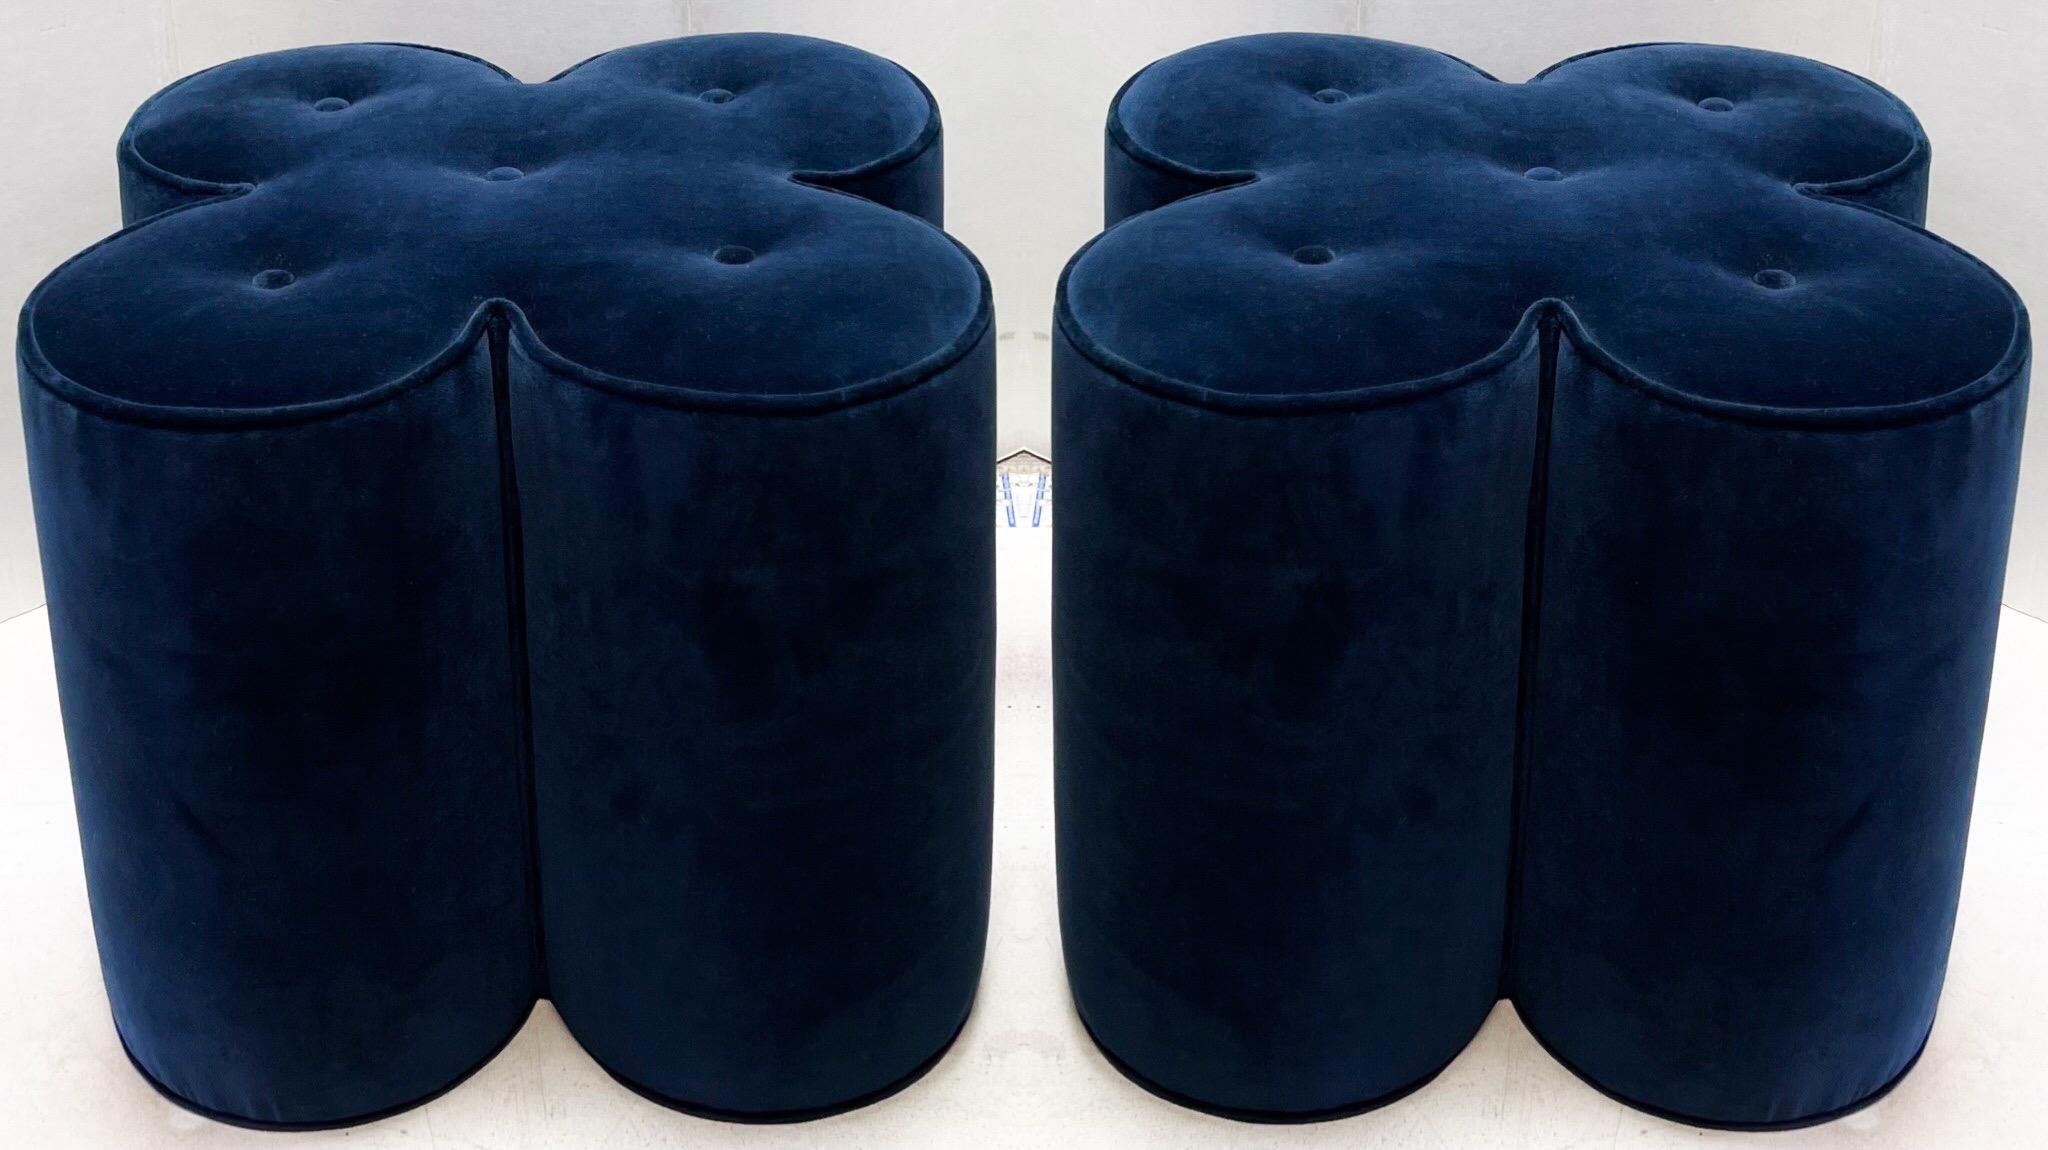 These are fun! The offering is a pair of tufted navy velvet floral form ottomans. They are unmarked and in very good condition.